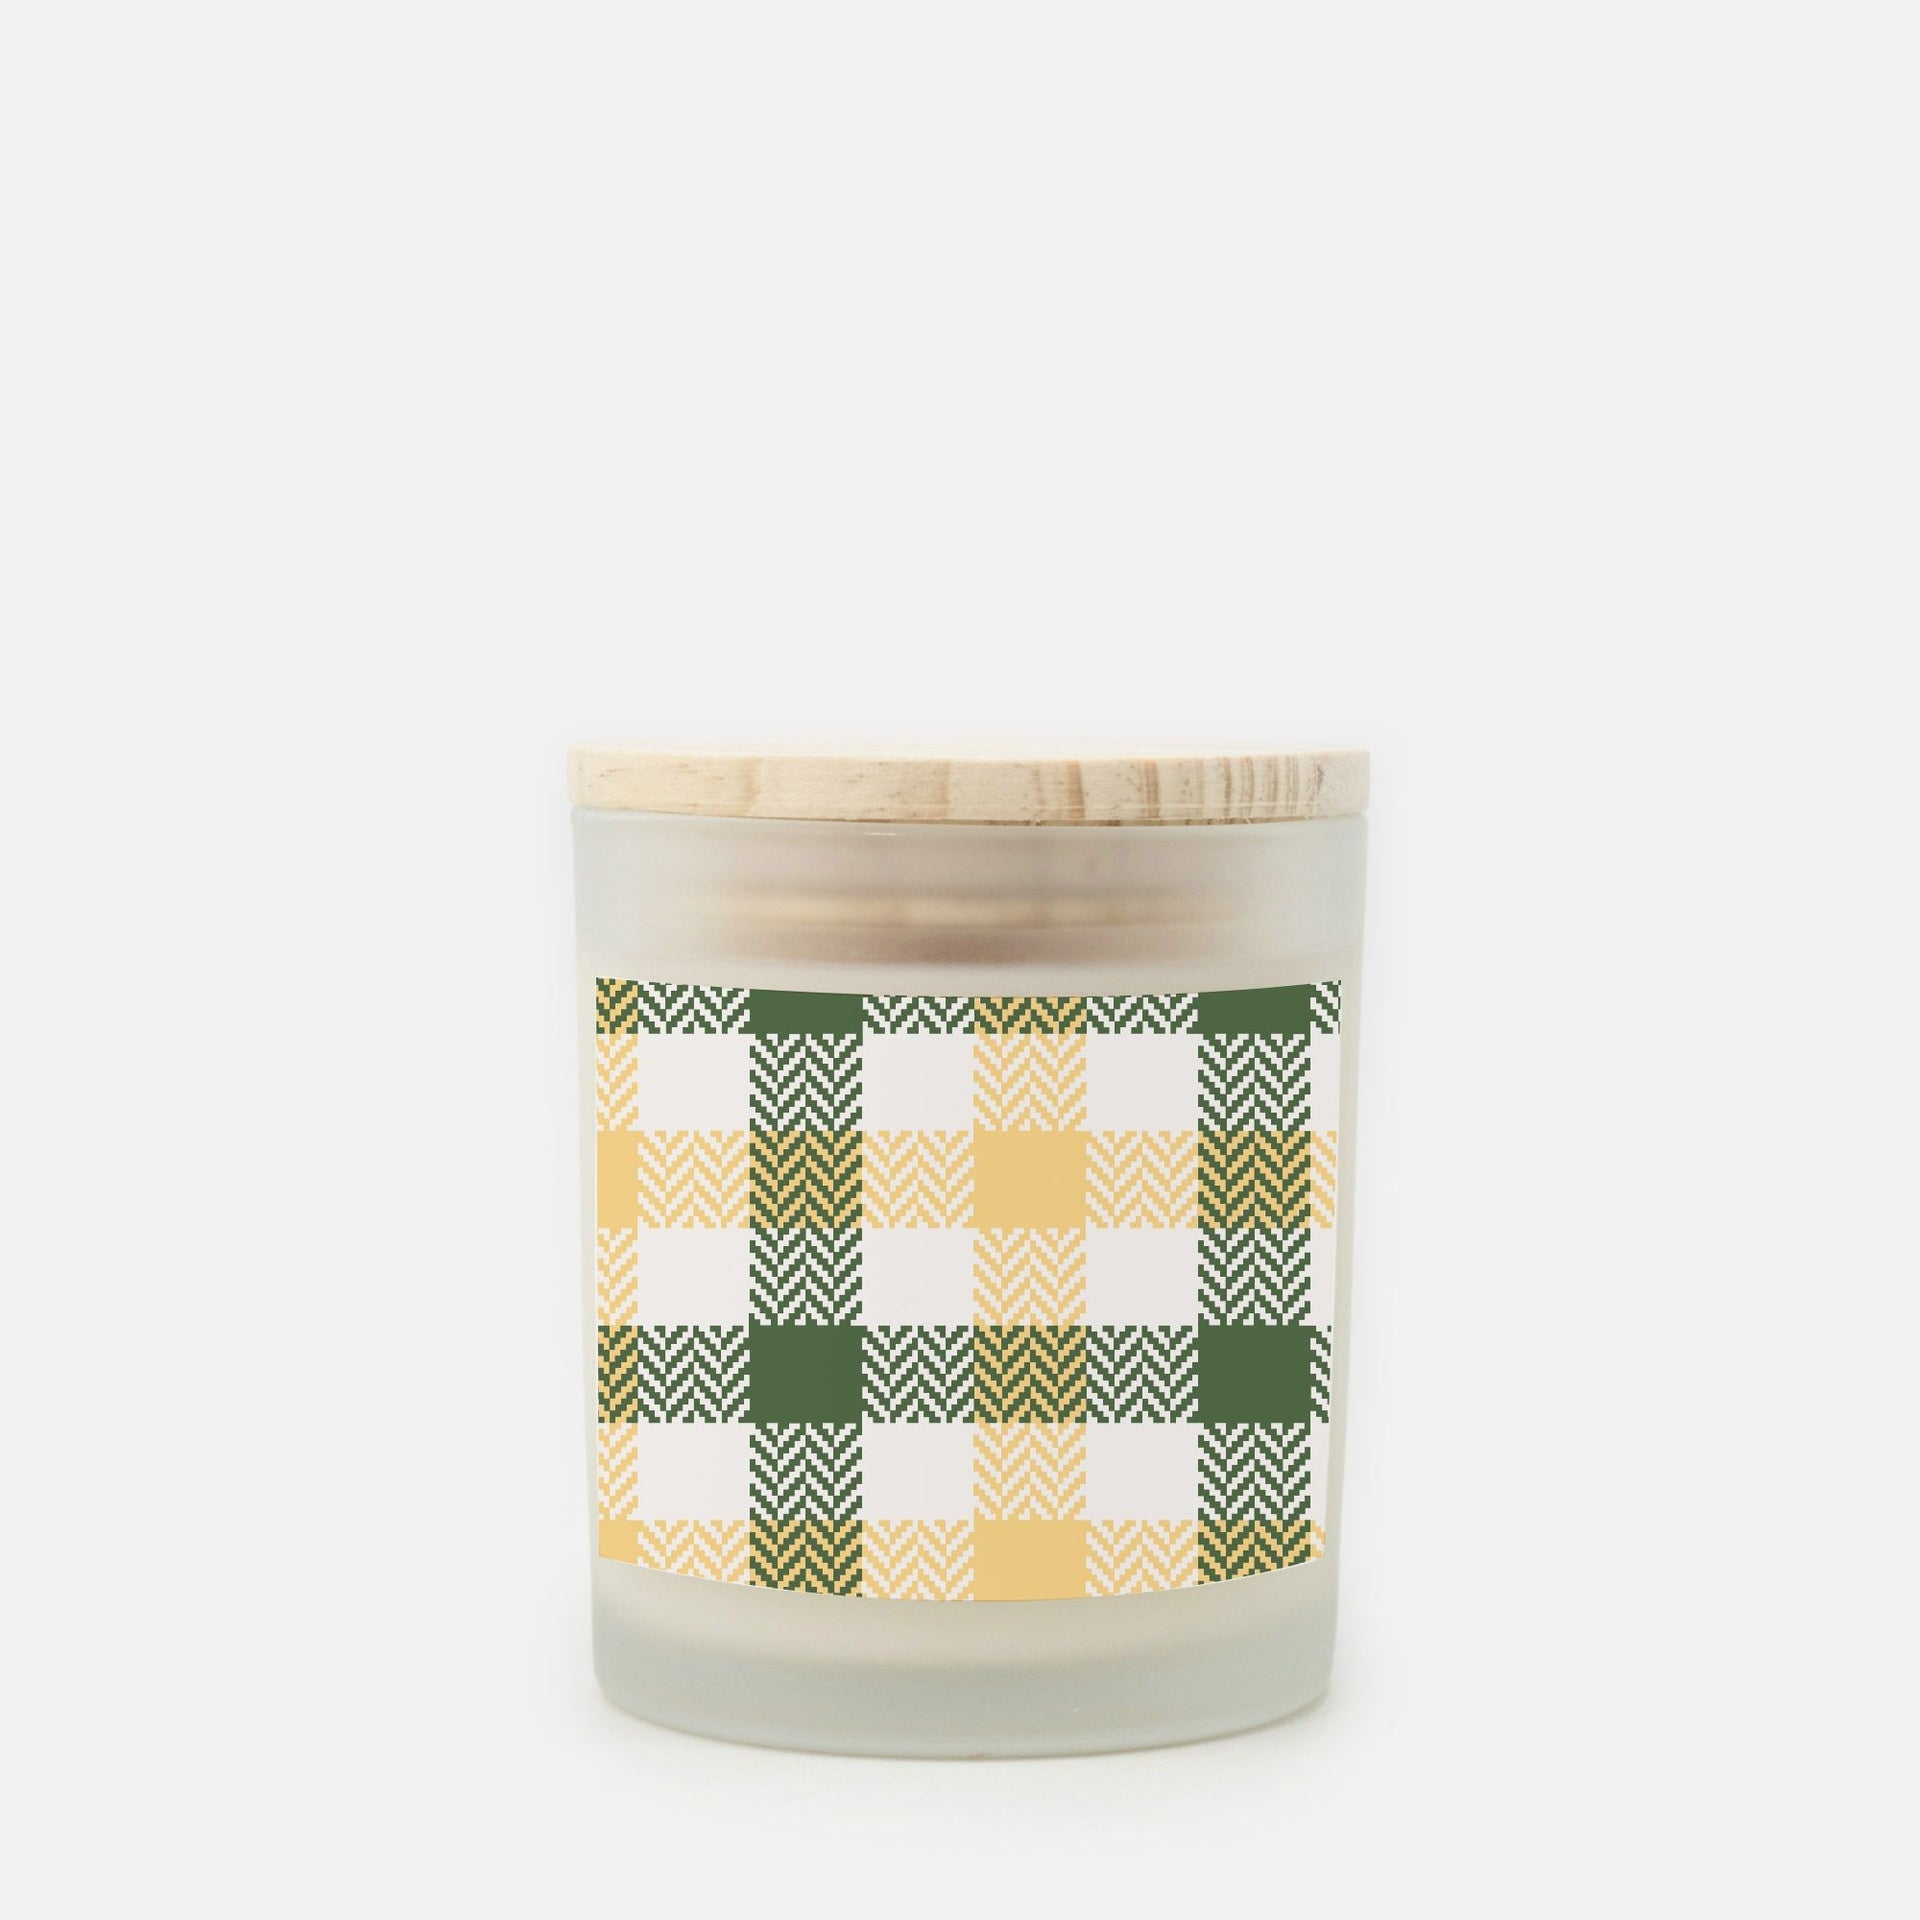 Lifestyle Details - Green & Yellow Plaid Frosted Glass Candle - Cashmere Vanilla